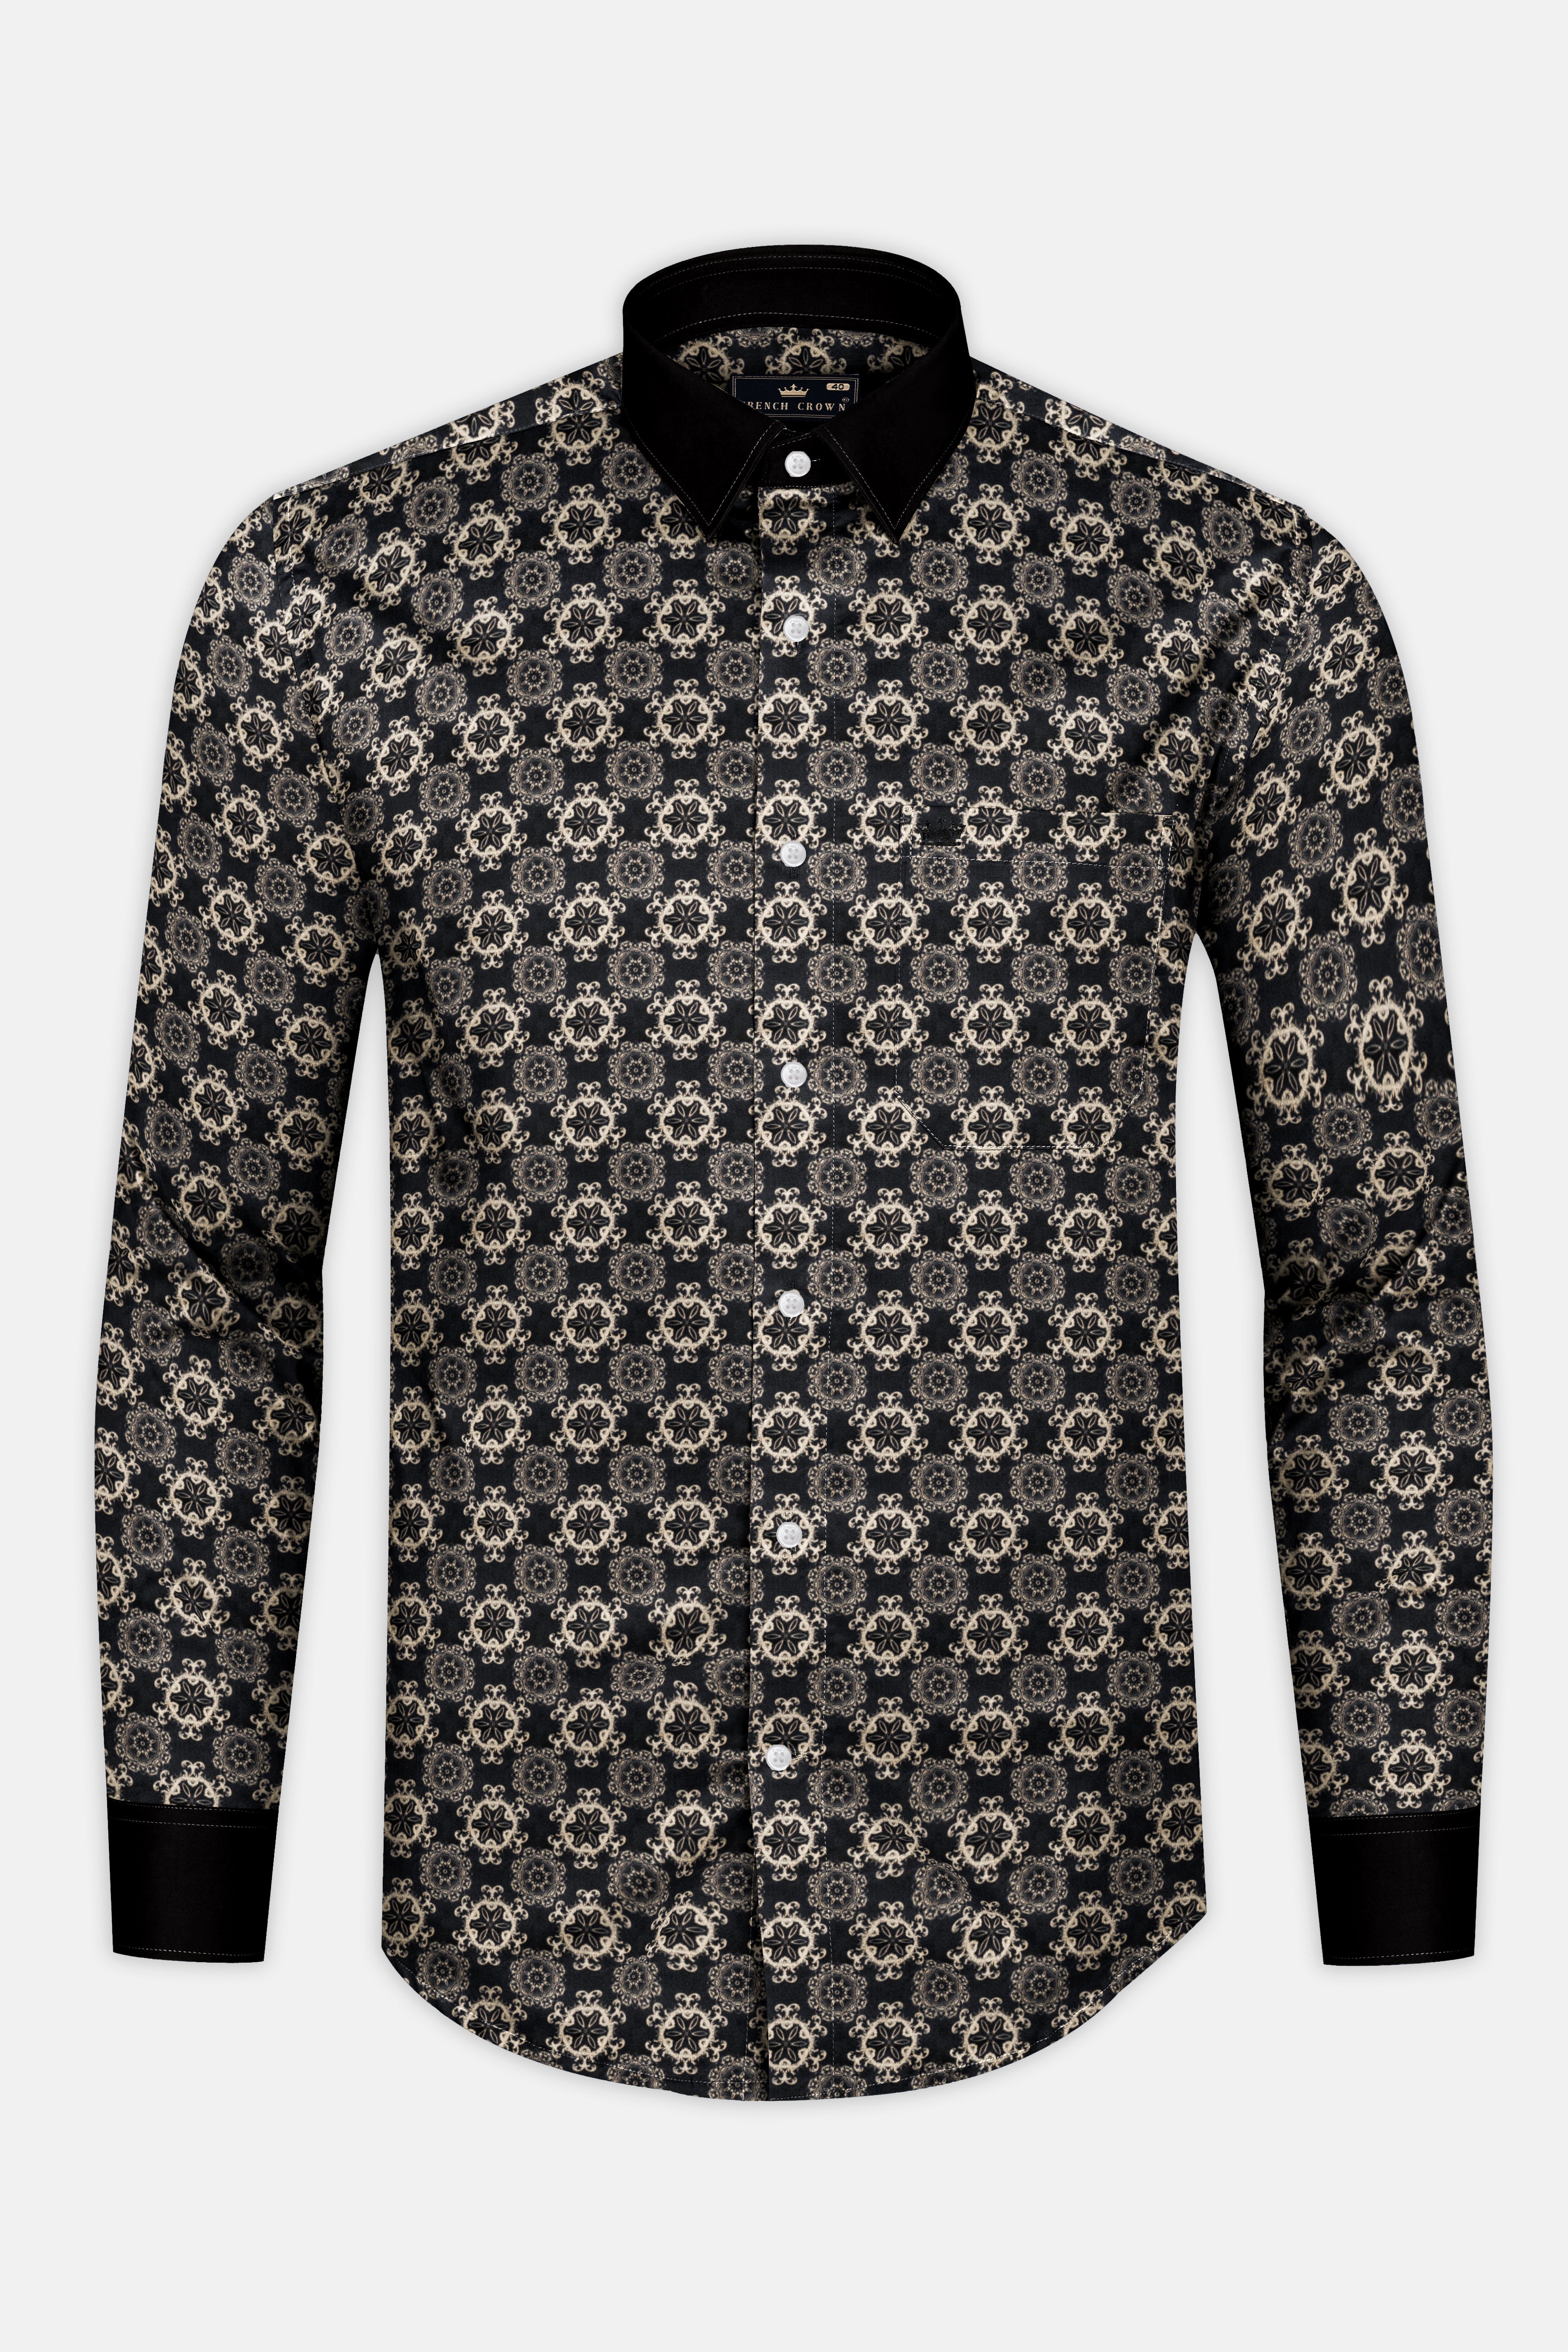 Black with Almond Brown Sequence Flower Printed Super Soft Premium Cotton Shirt